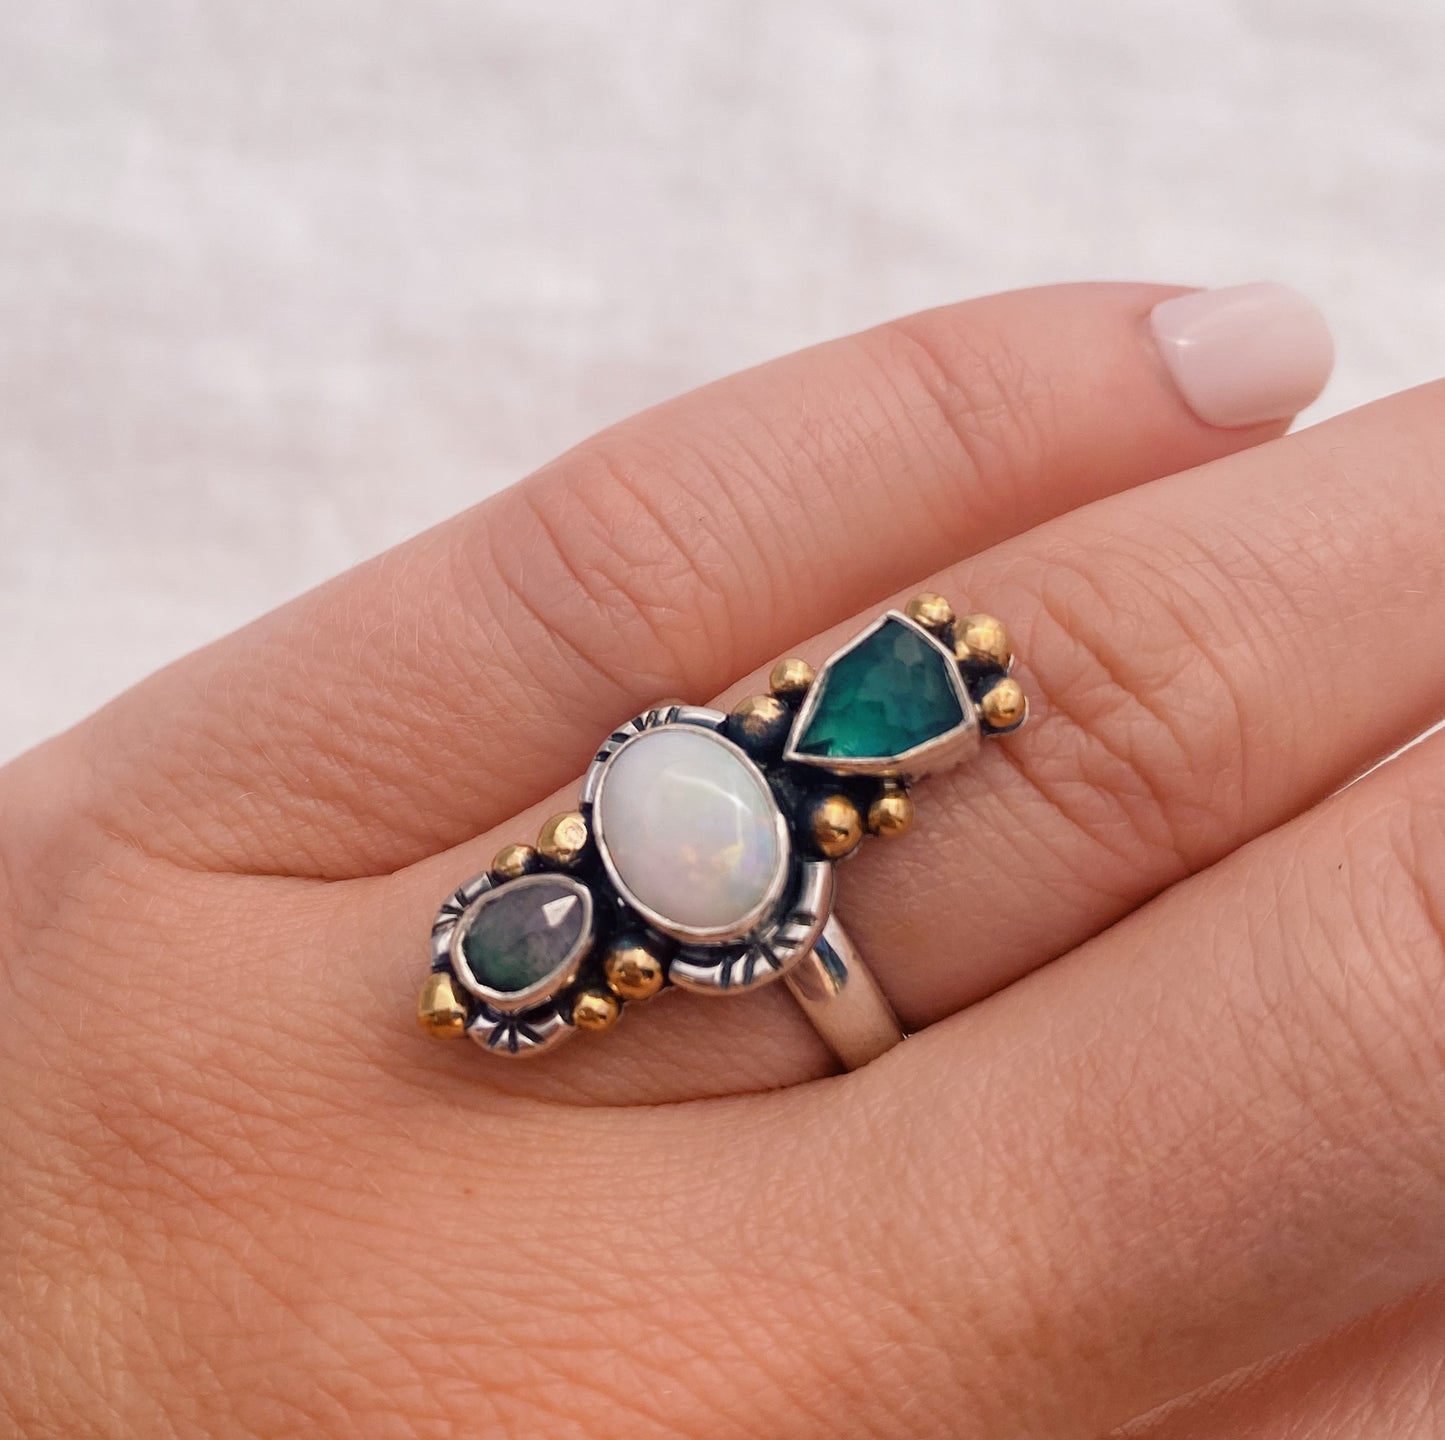 Trine Ring (D) ◇ Faceted Tourmaline + Australian Opal + Faceted Tourmaline ◇ Size 7.5